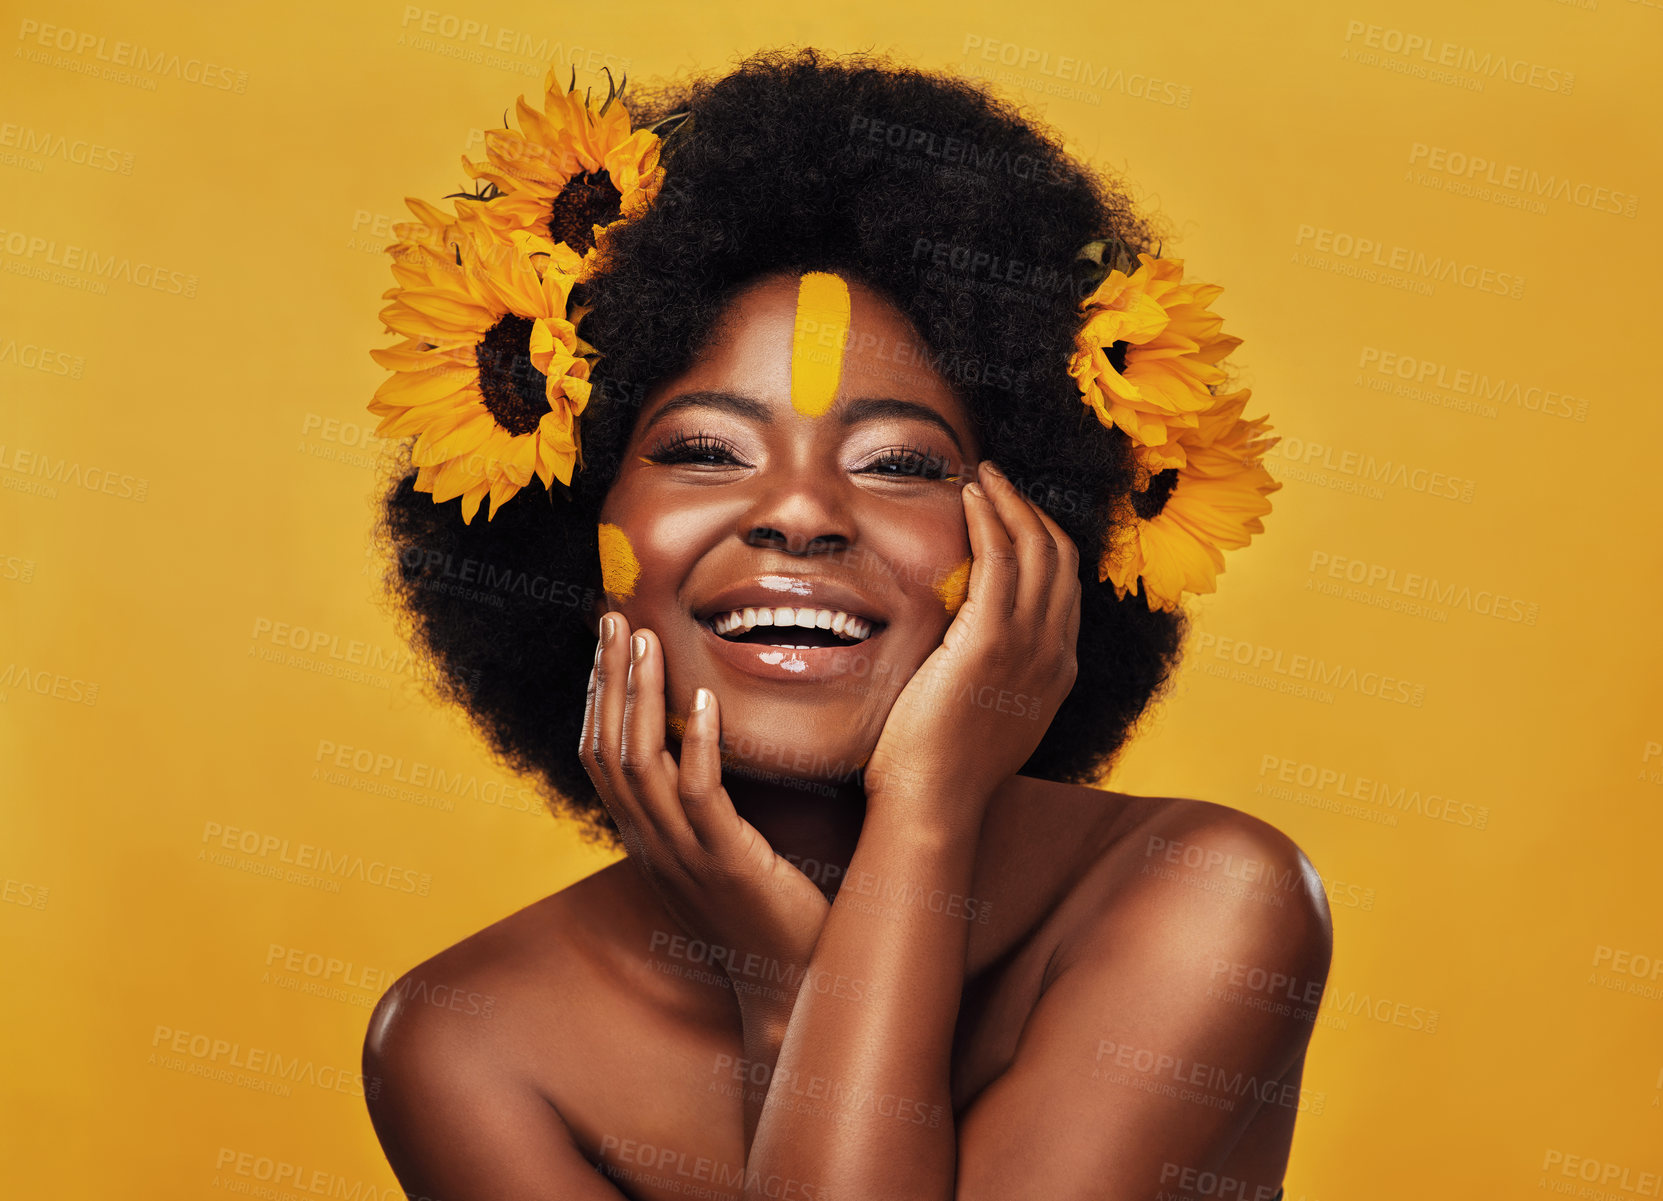 Buy stock photo Studio portrait of a beautiful young woman smiling while posing with sunflowers in her hair against a mustard background